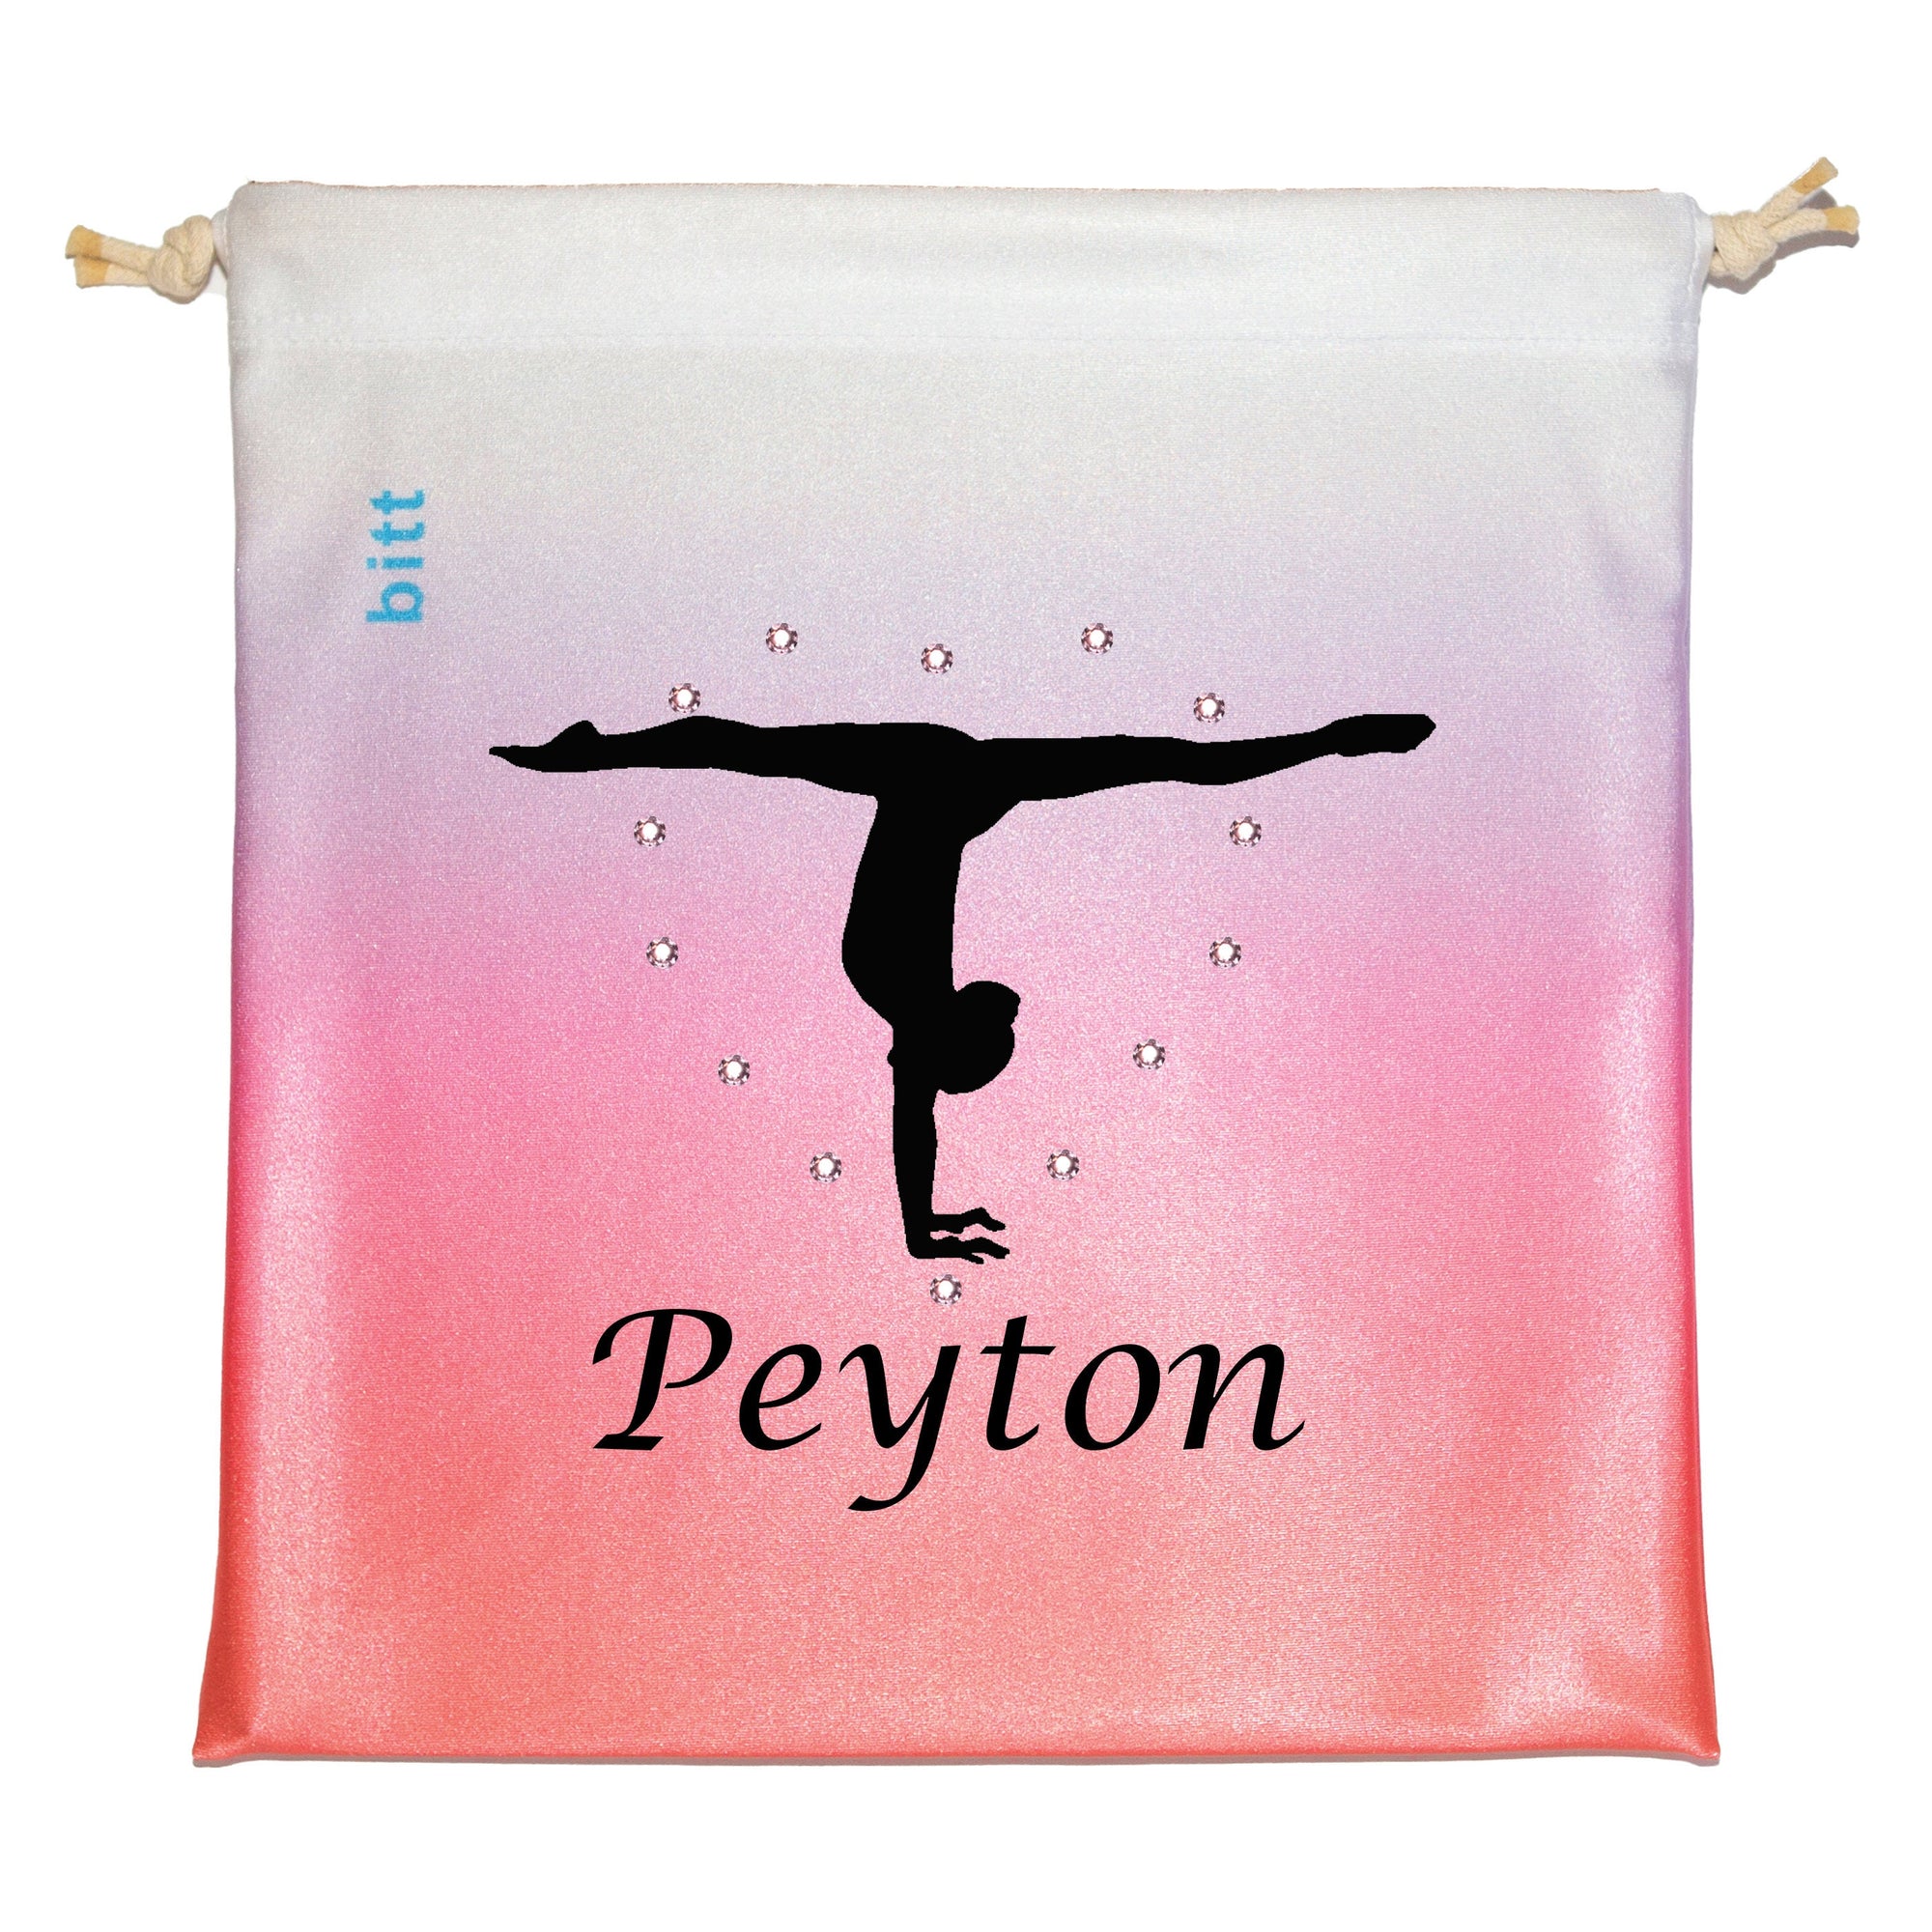 Personlized Gymnastics Grip Bag with Handstand in Coral, Purple, White Ombre